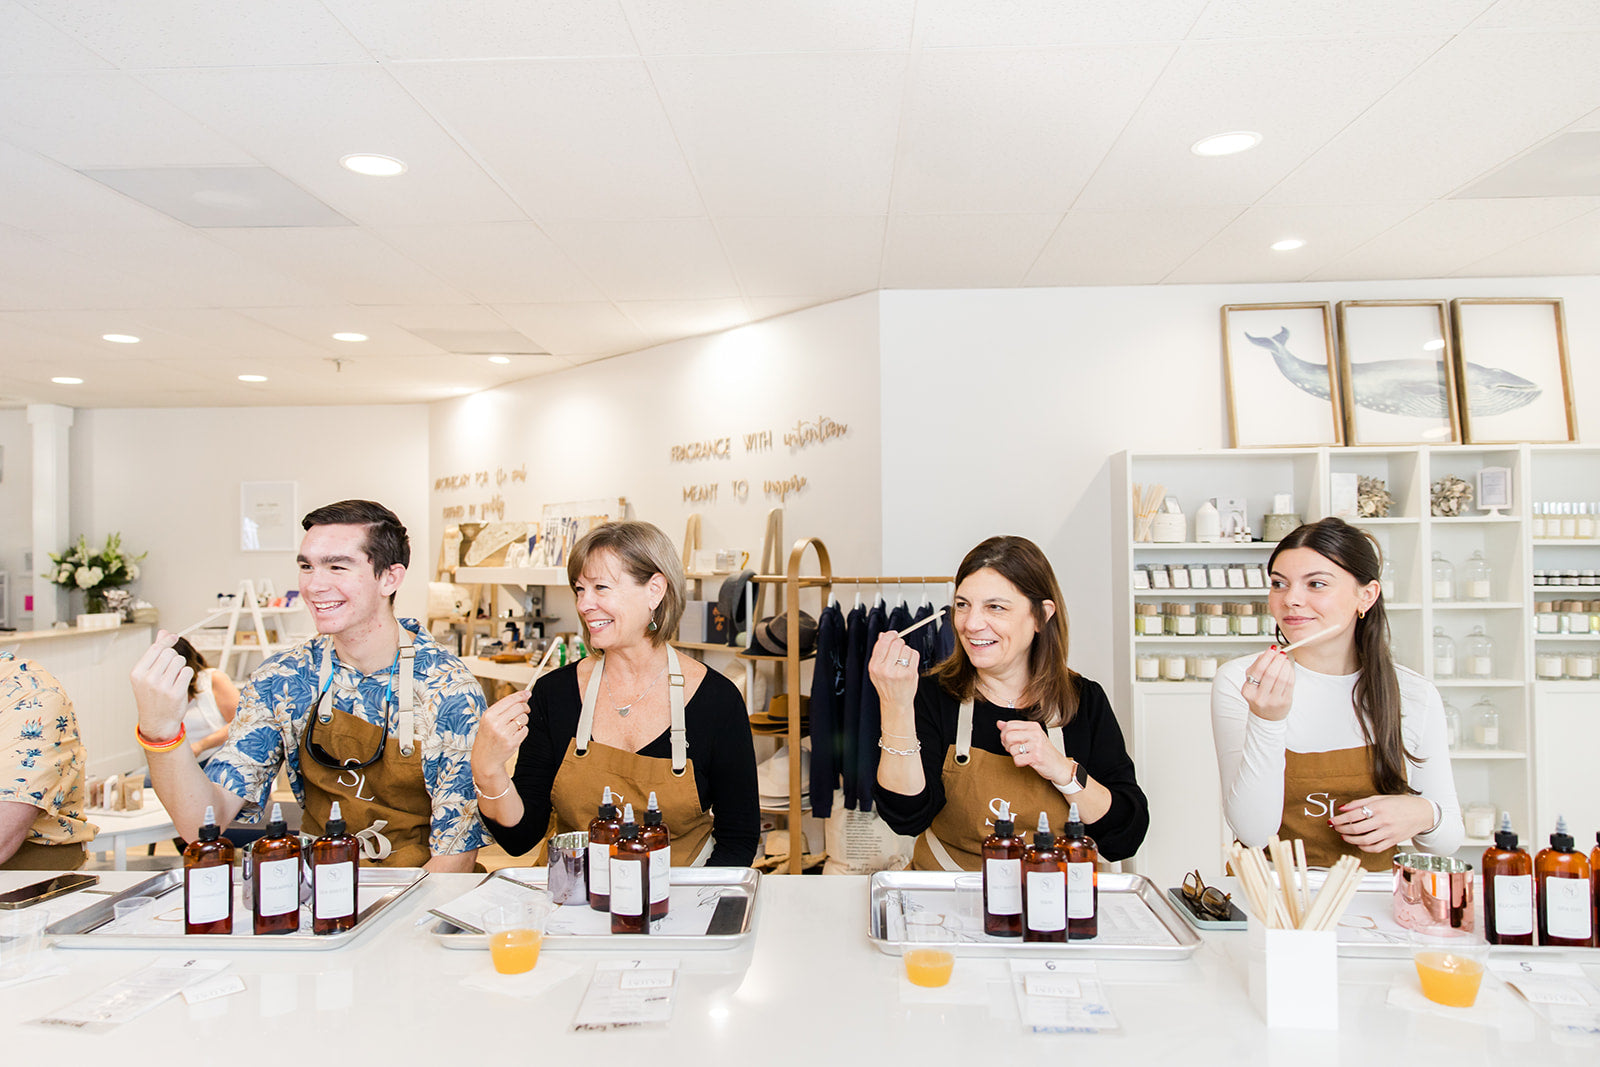 A group of happy people engaging in a candle making workshop at a bright and modern studio.